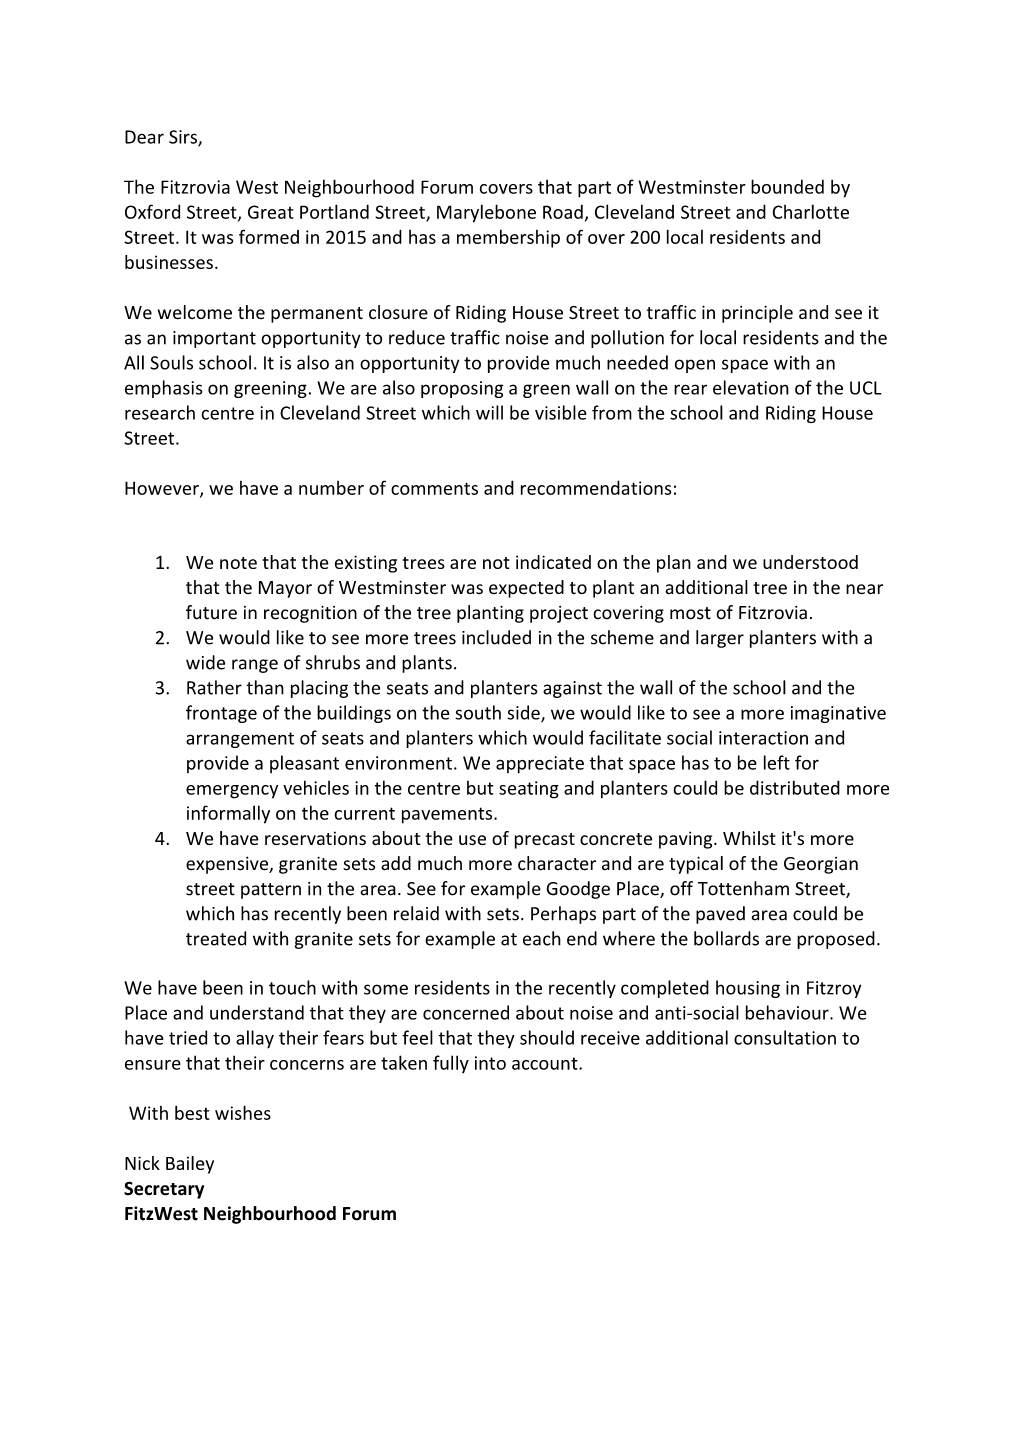 Fitzwest Forum Letter to Westminster City Council